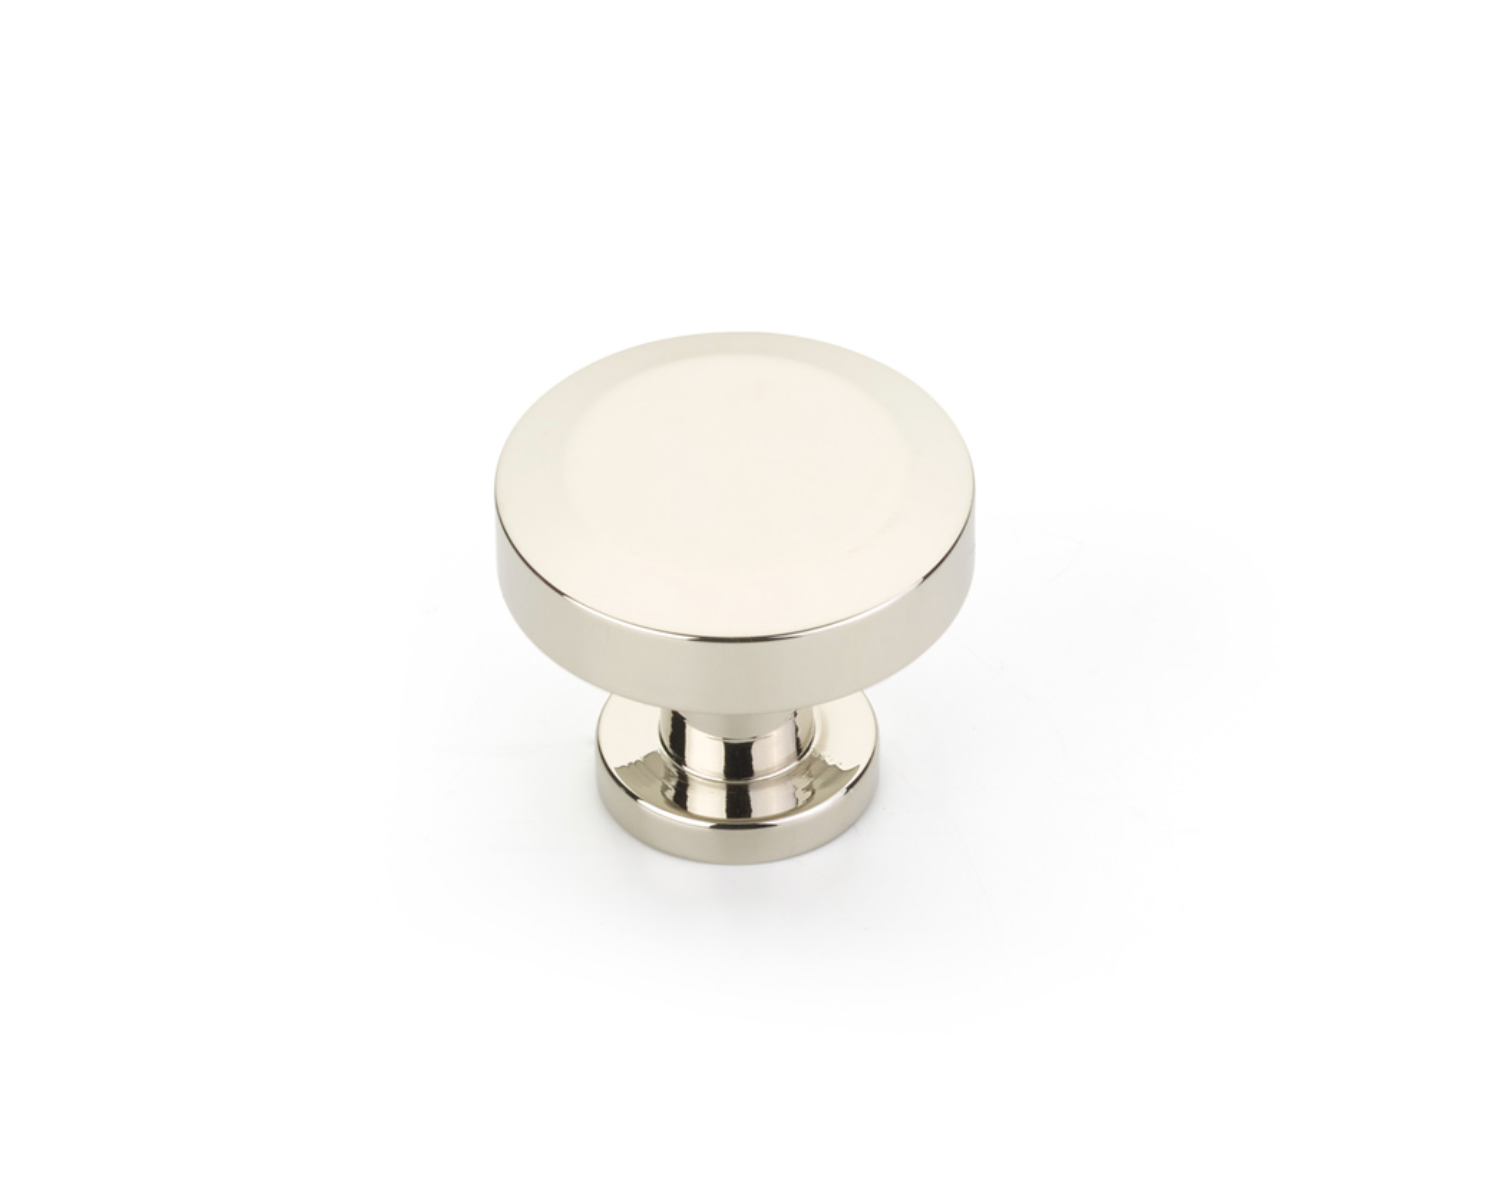 Polished Nickel "Heather" T-Bar Cabinet Knobs and Drawer Pulls